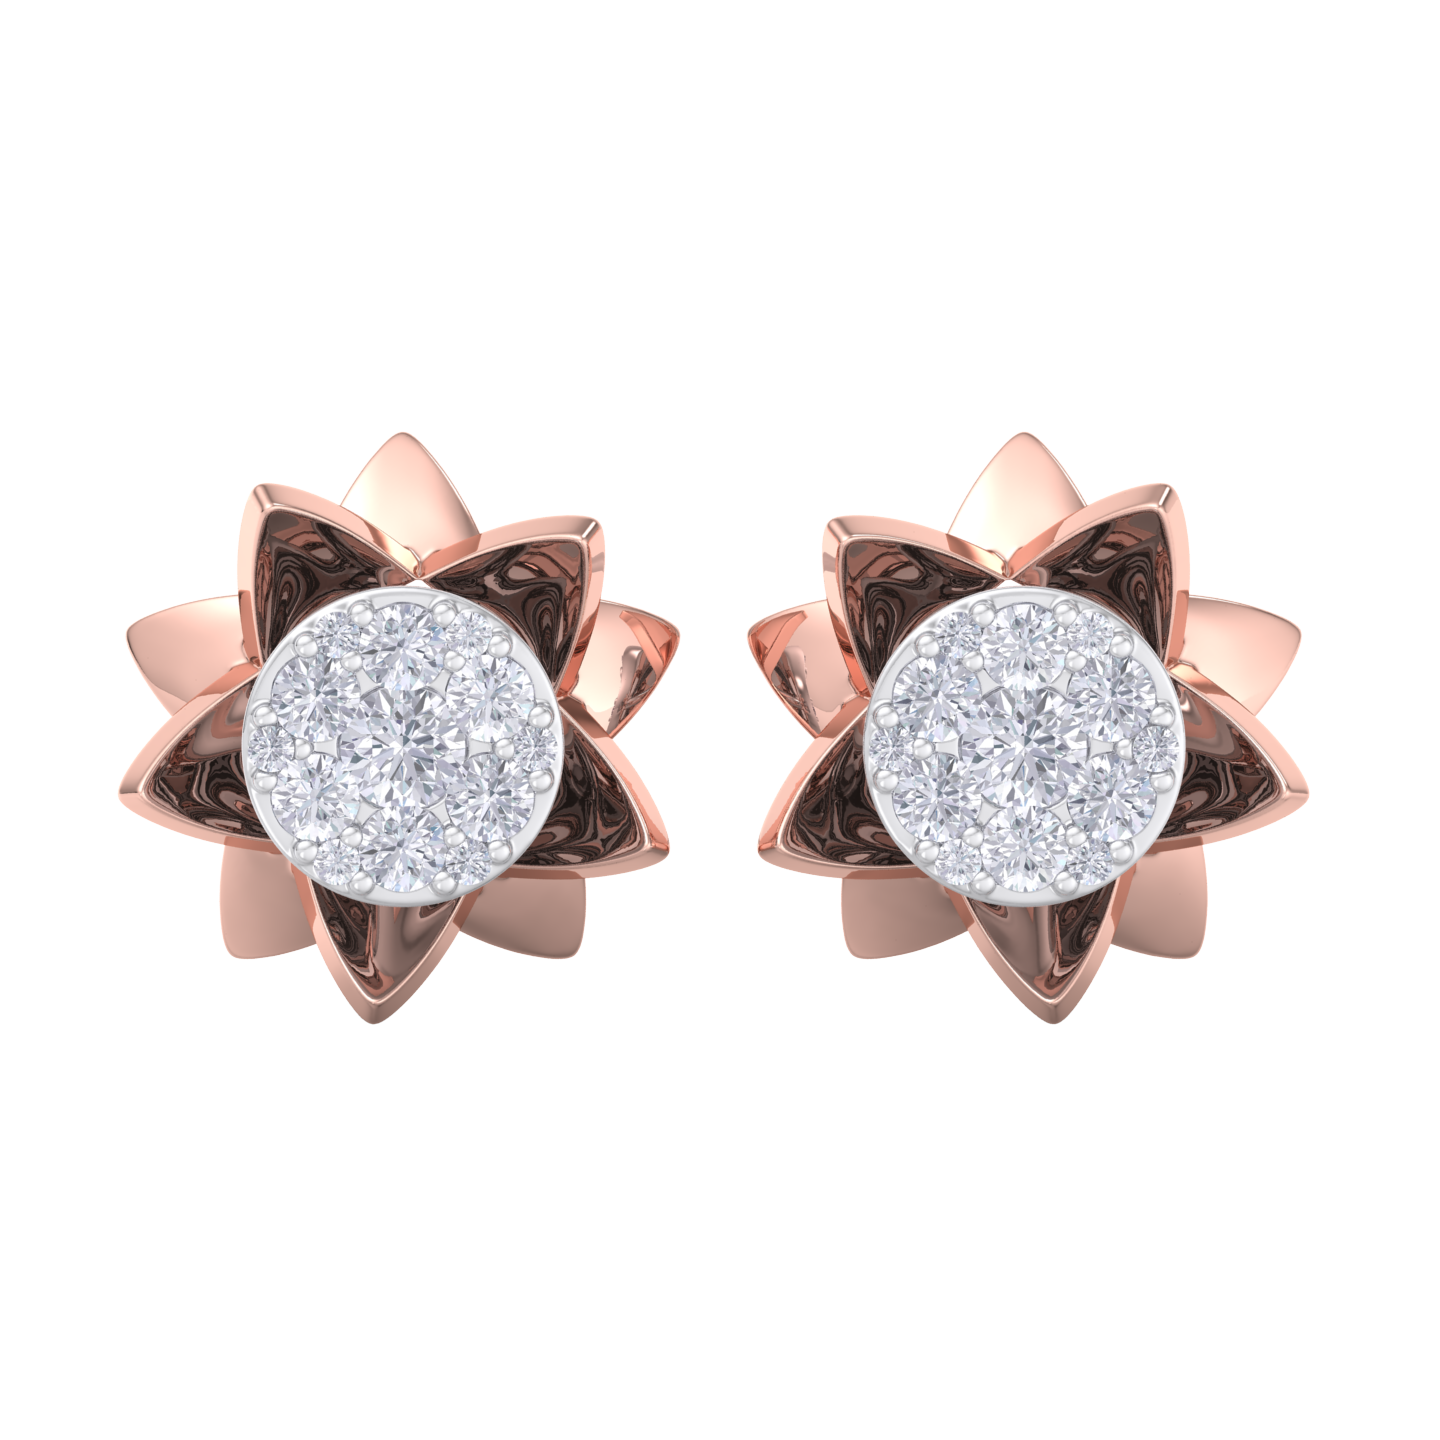 Flower shaped stud earrings in rose gold with white diamonds of 0.62 ct in weight